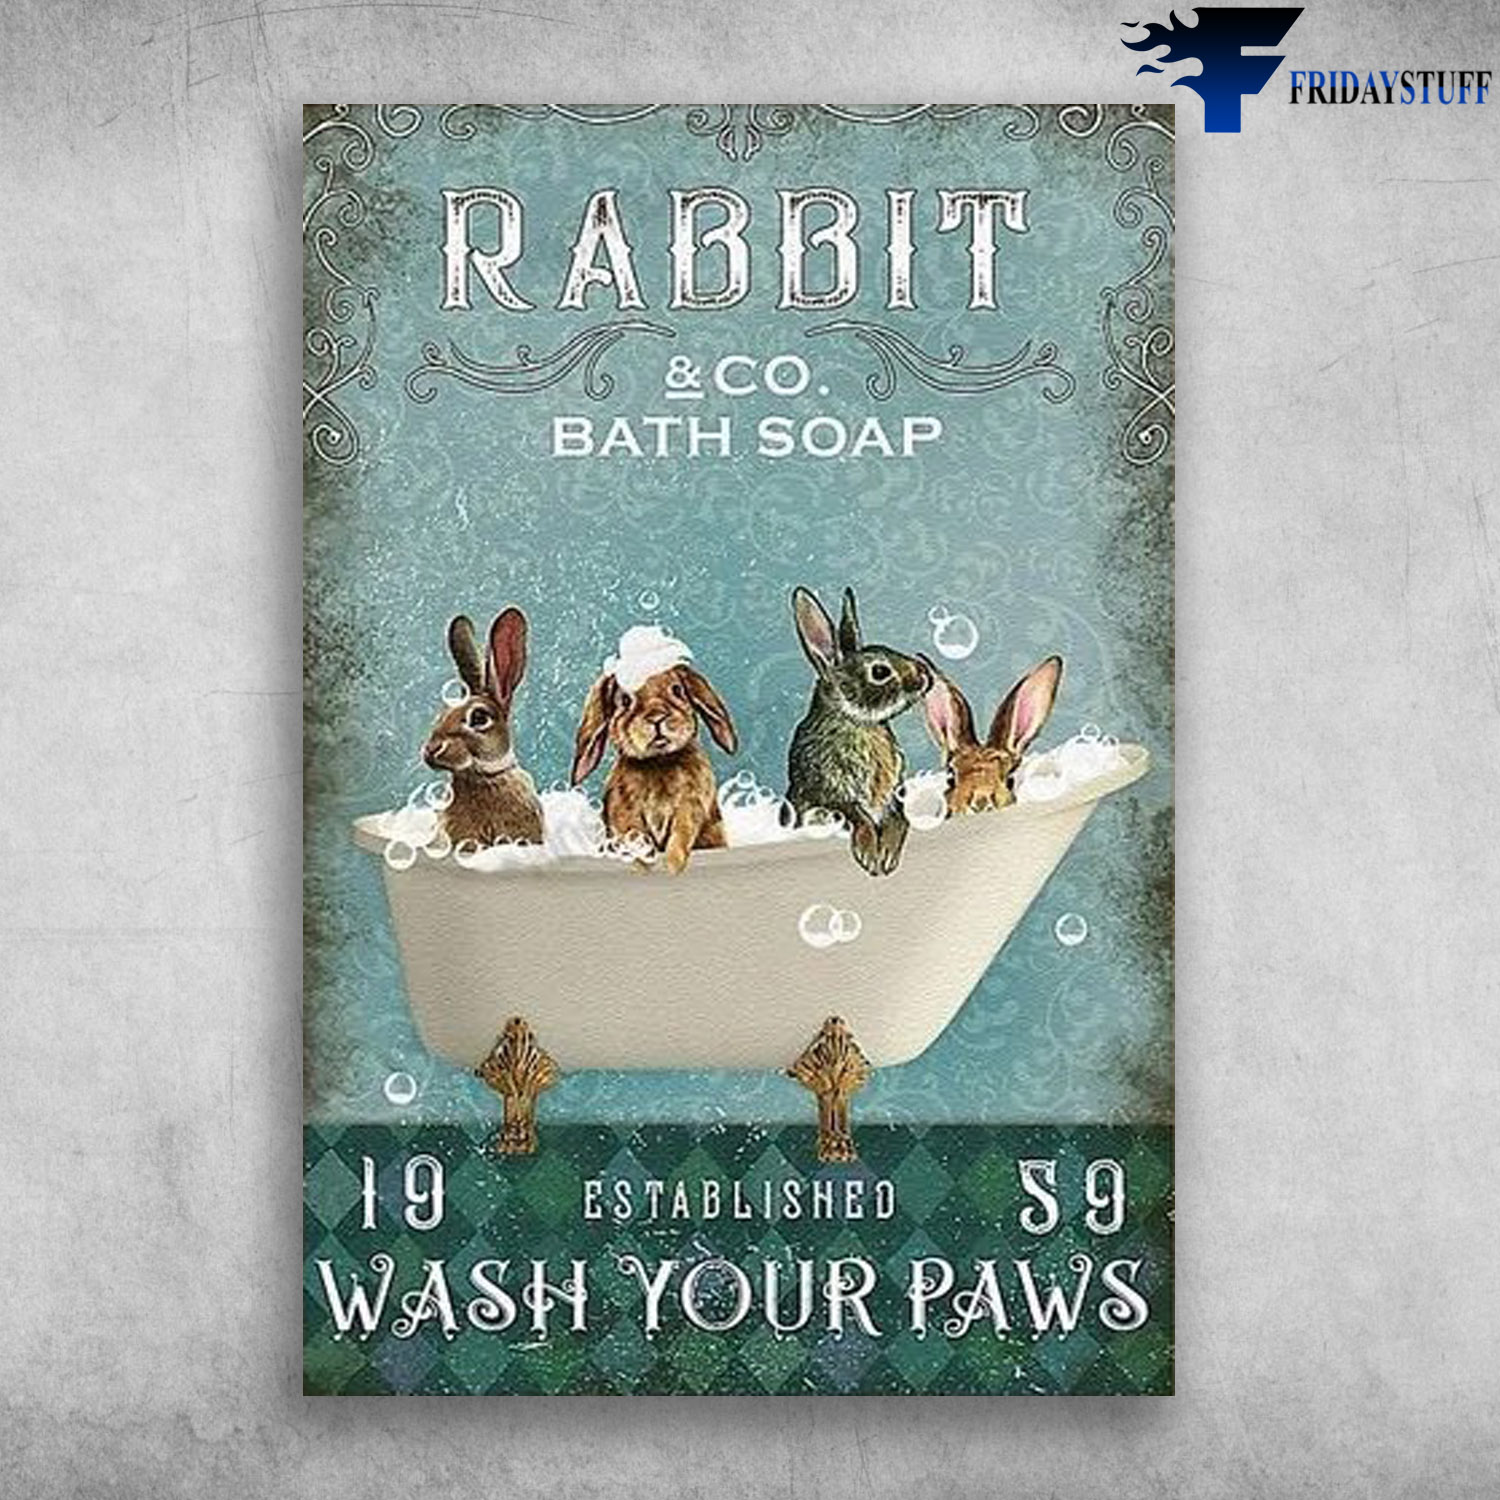 Rabbits In Bath Soap - Rabbit And CO. Bath Soap, 19 Established 56, Wash Your Paws